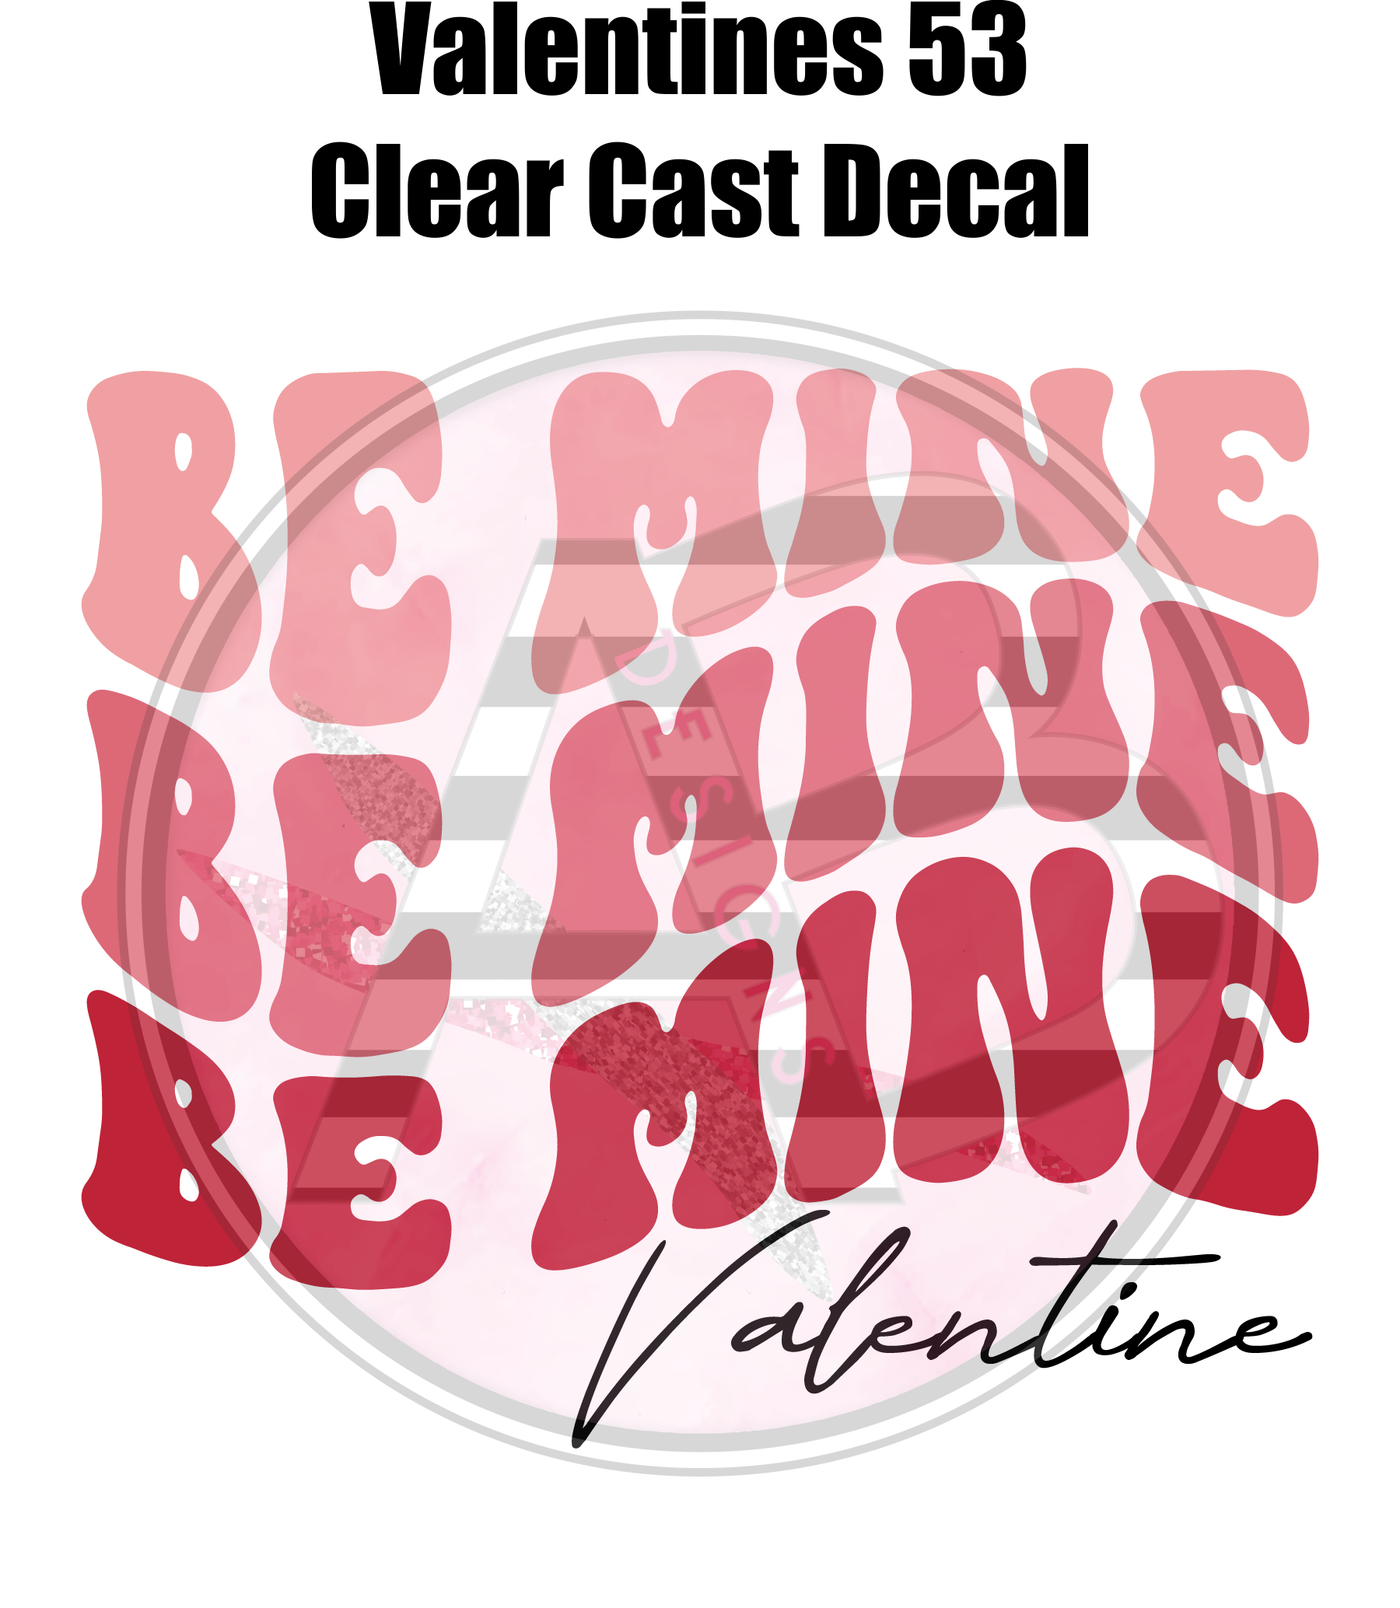 Valentines 53 - Clear Cast Decal